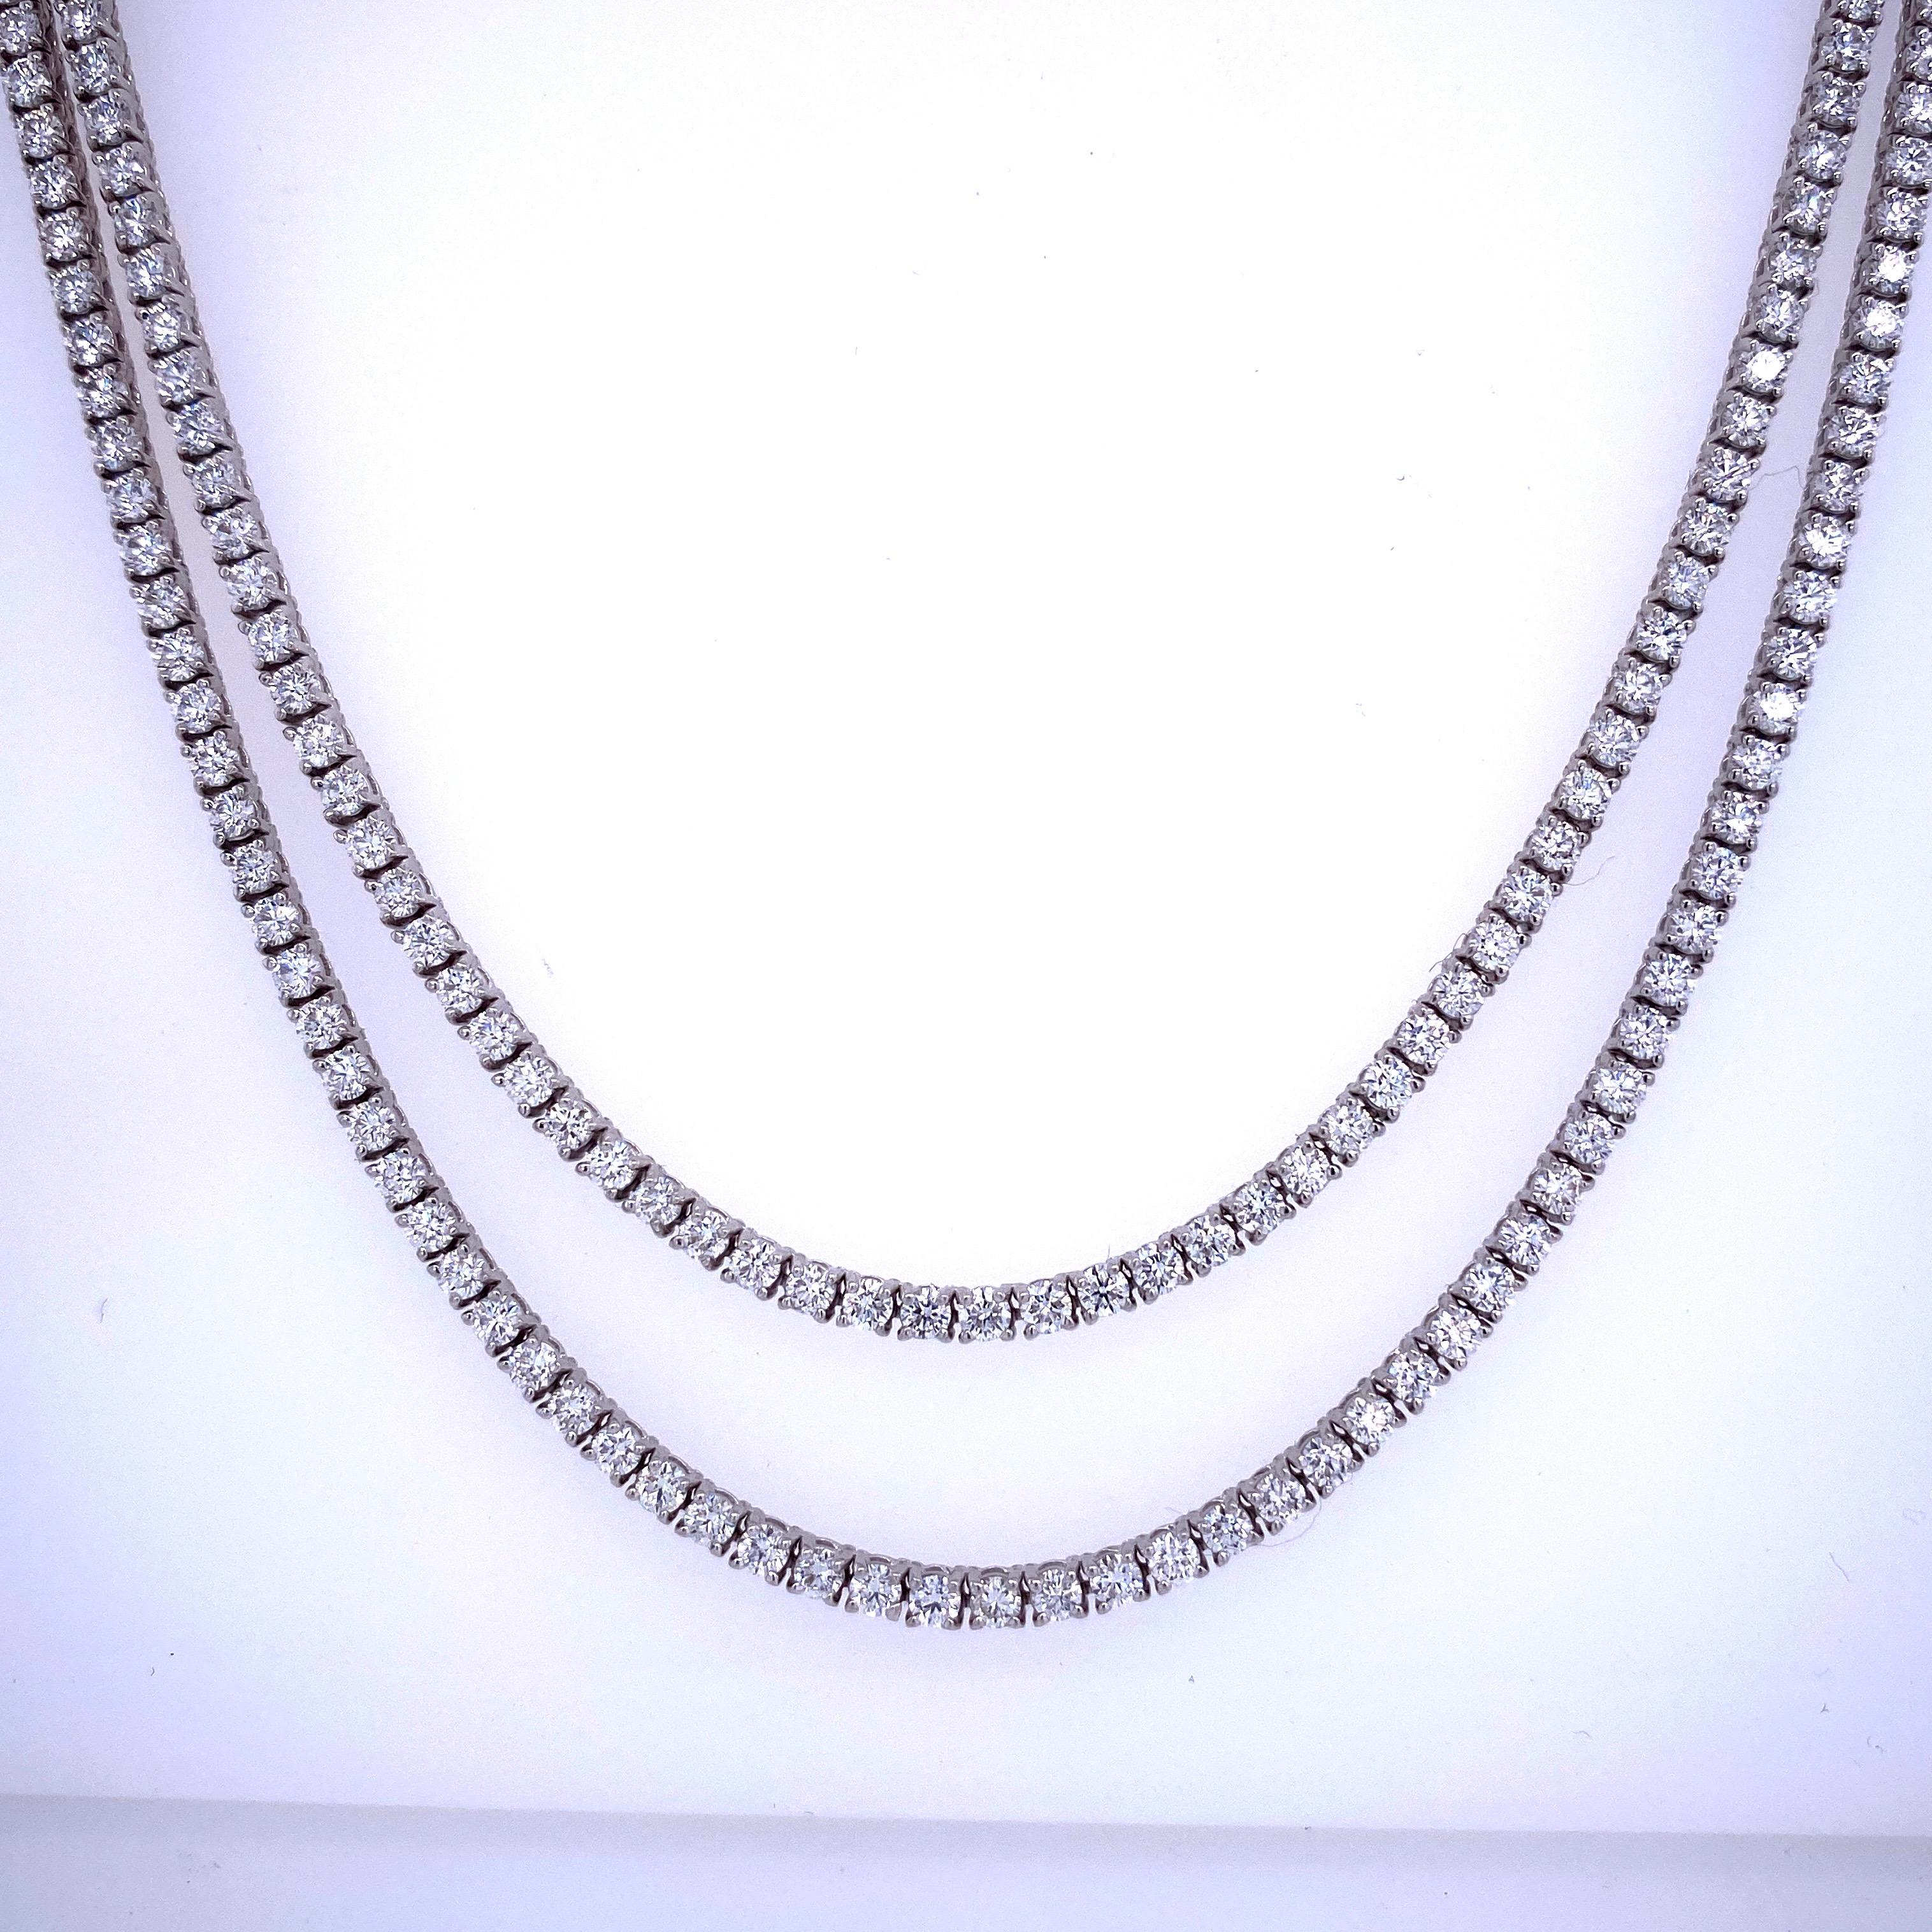 14K White Gold tennis necklace featuring a double diamond row of 215 round brilliants weighing 6.67 carats and high polished white gold beads in the back. 
Color G-H
Clarity SI2